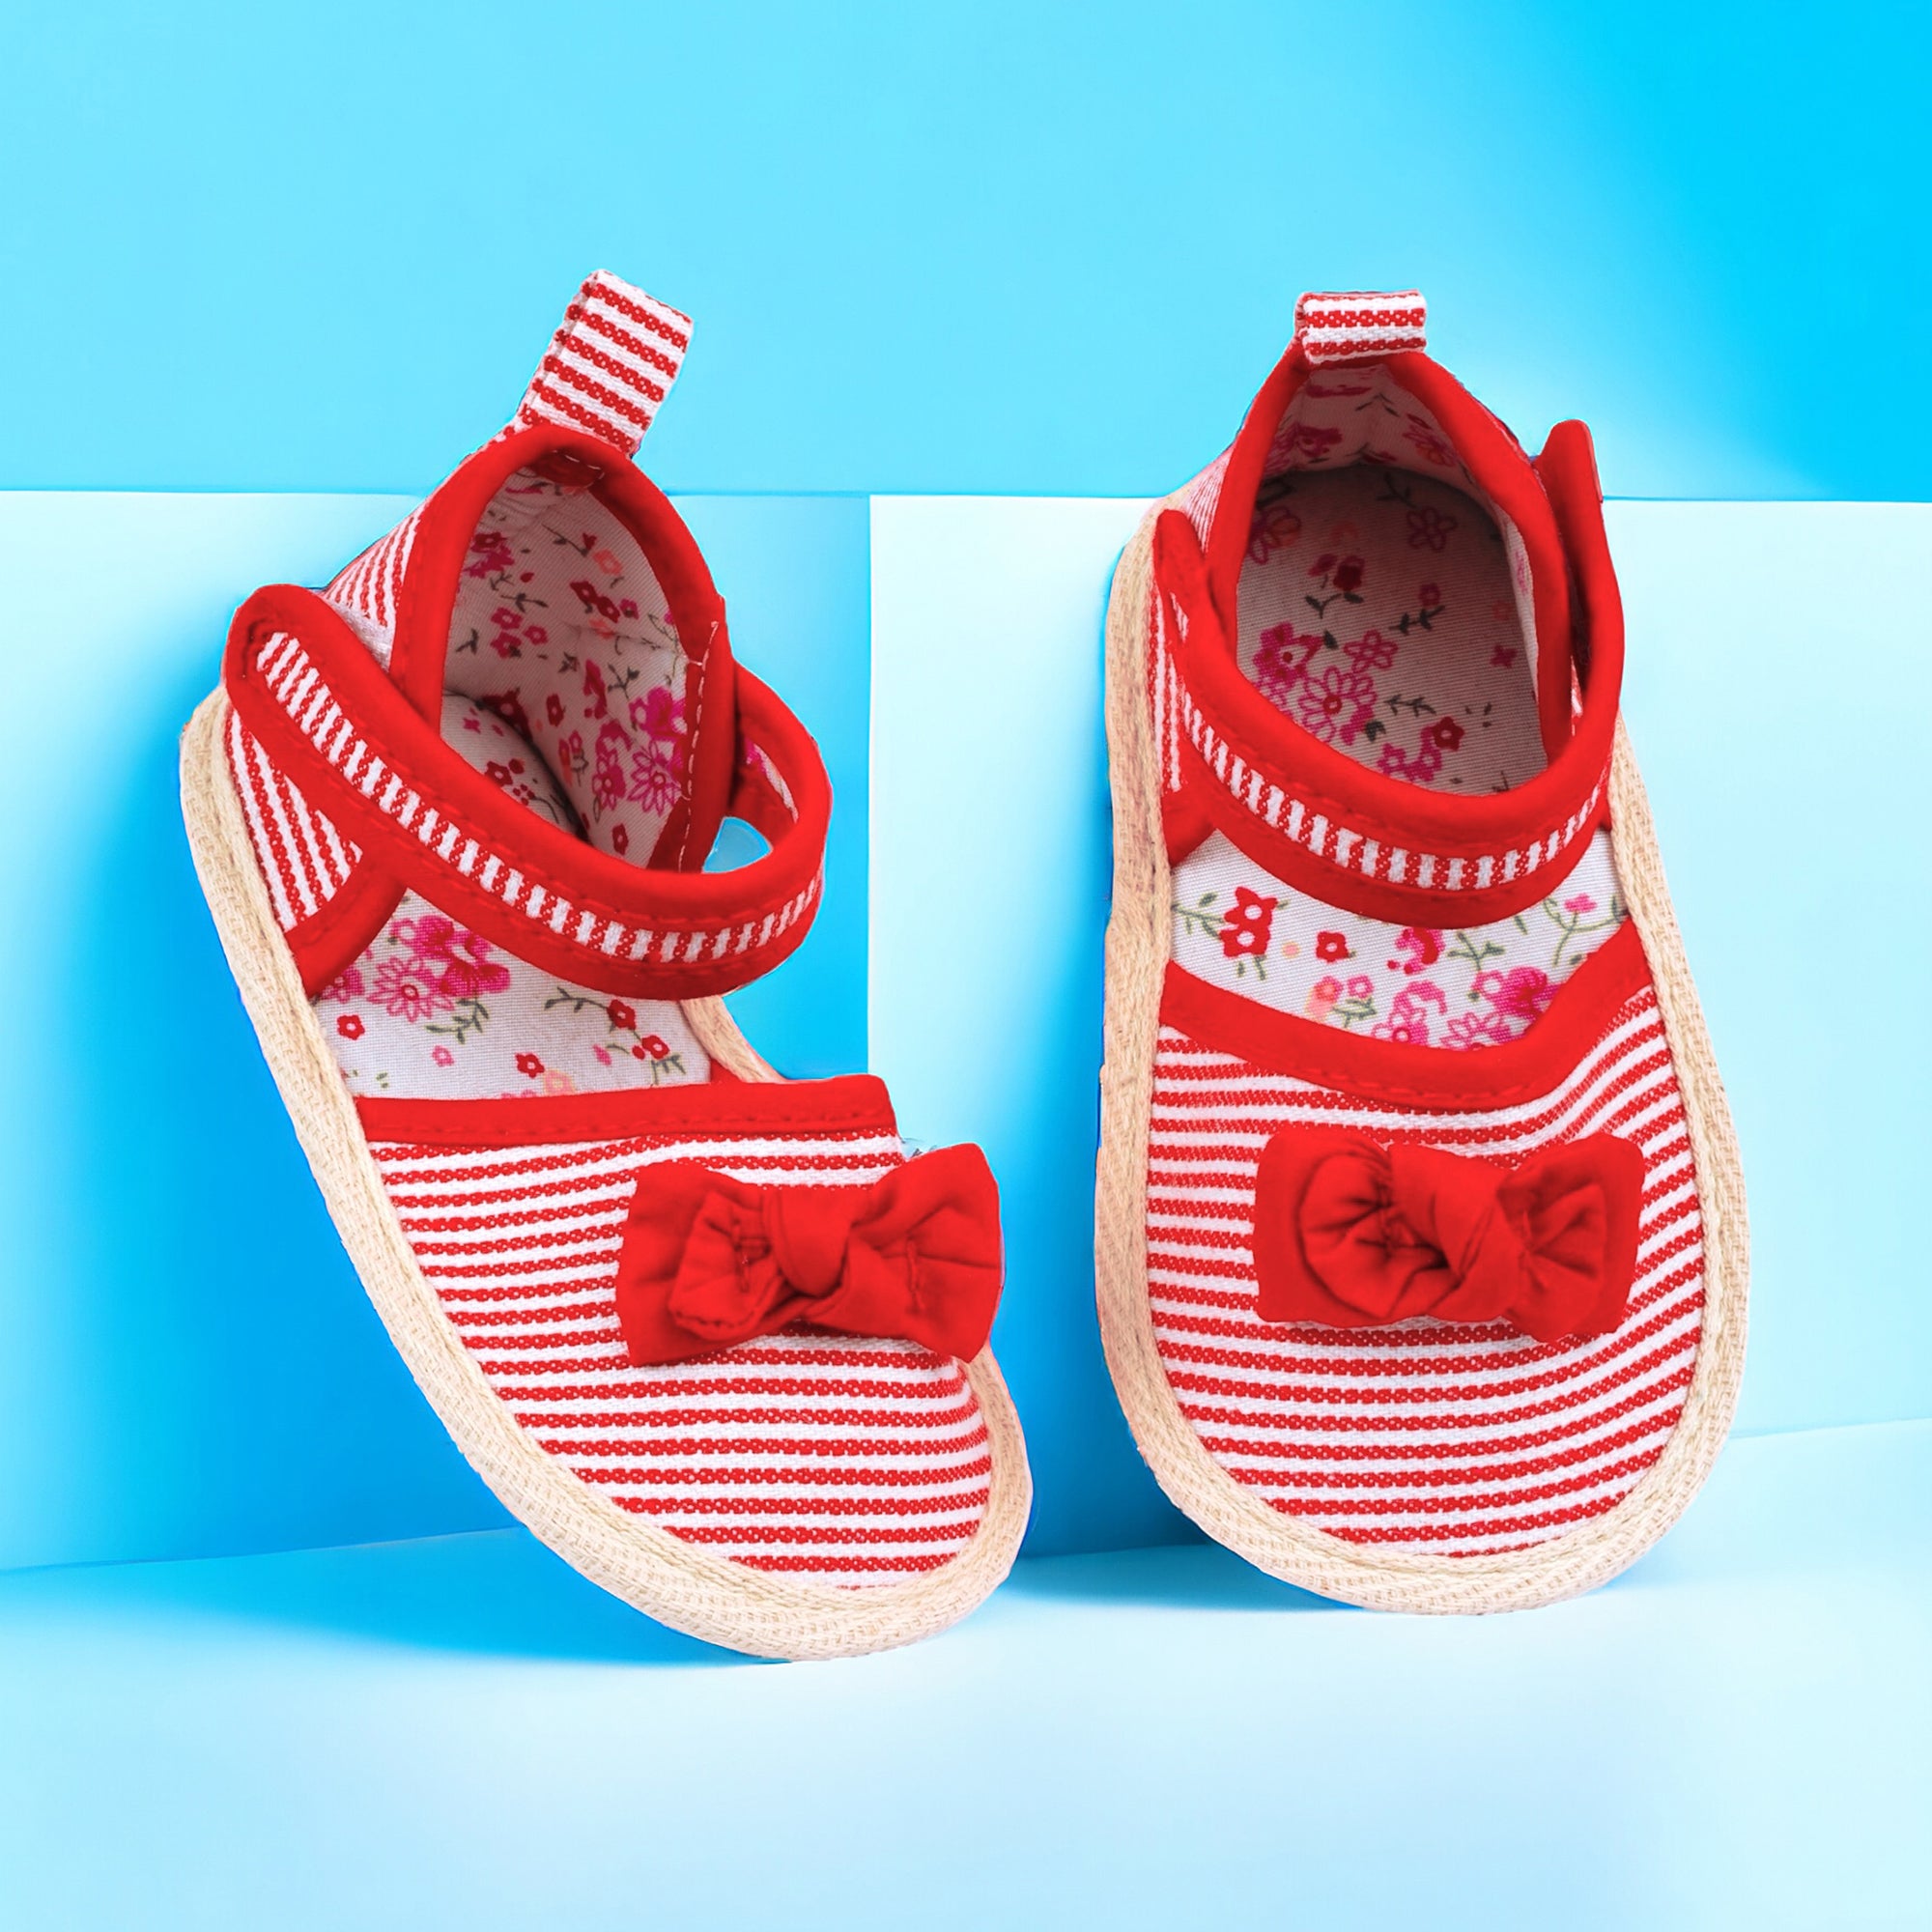 Baby Moo Bow Knot Striped Velcro Straps Anti-Skid Sandals - Red